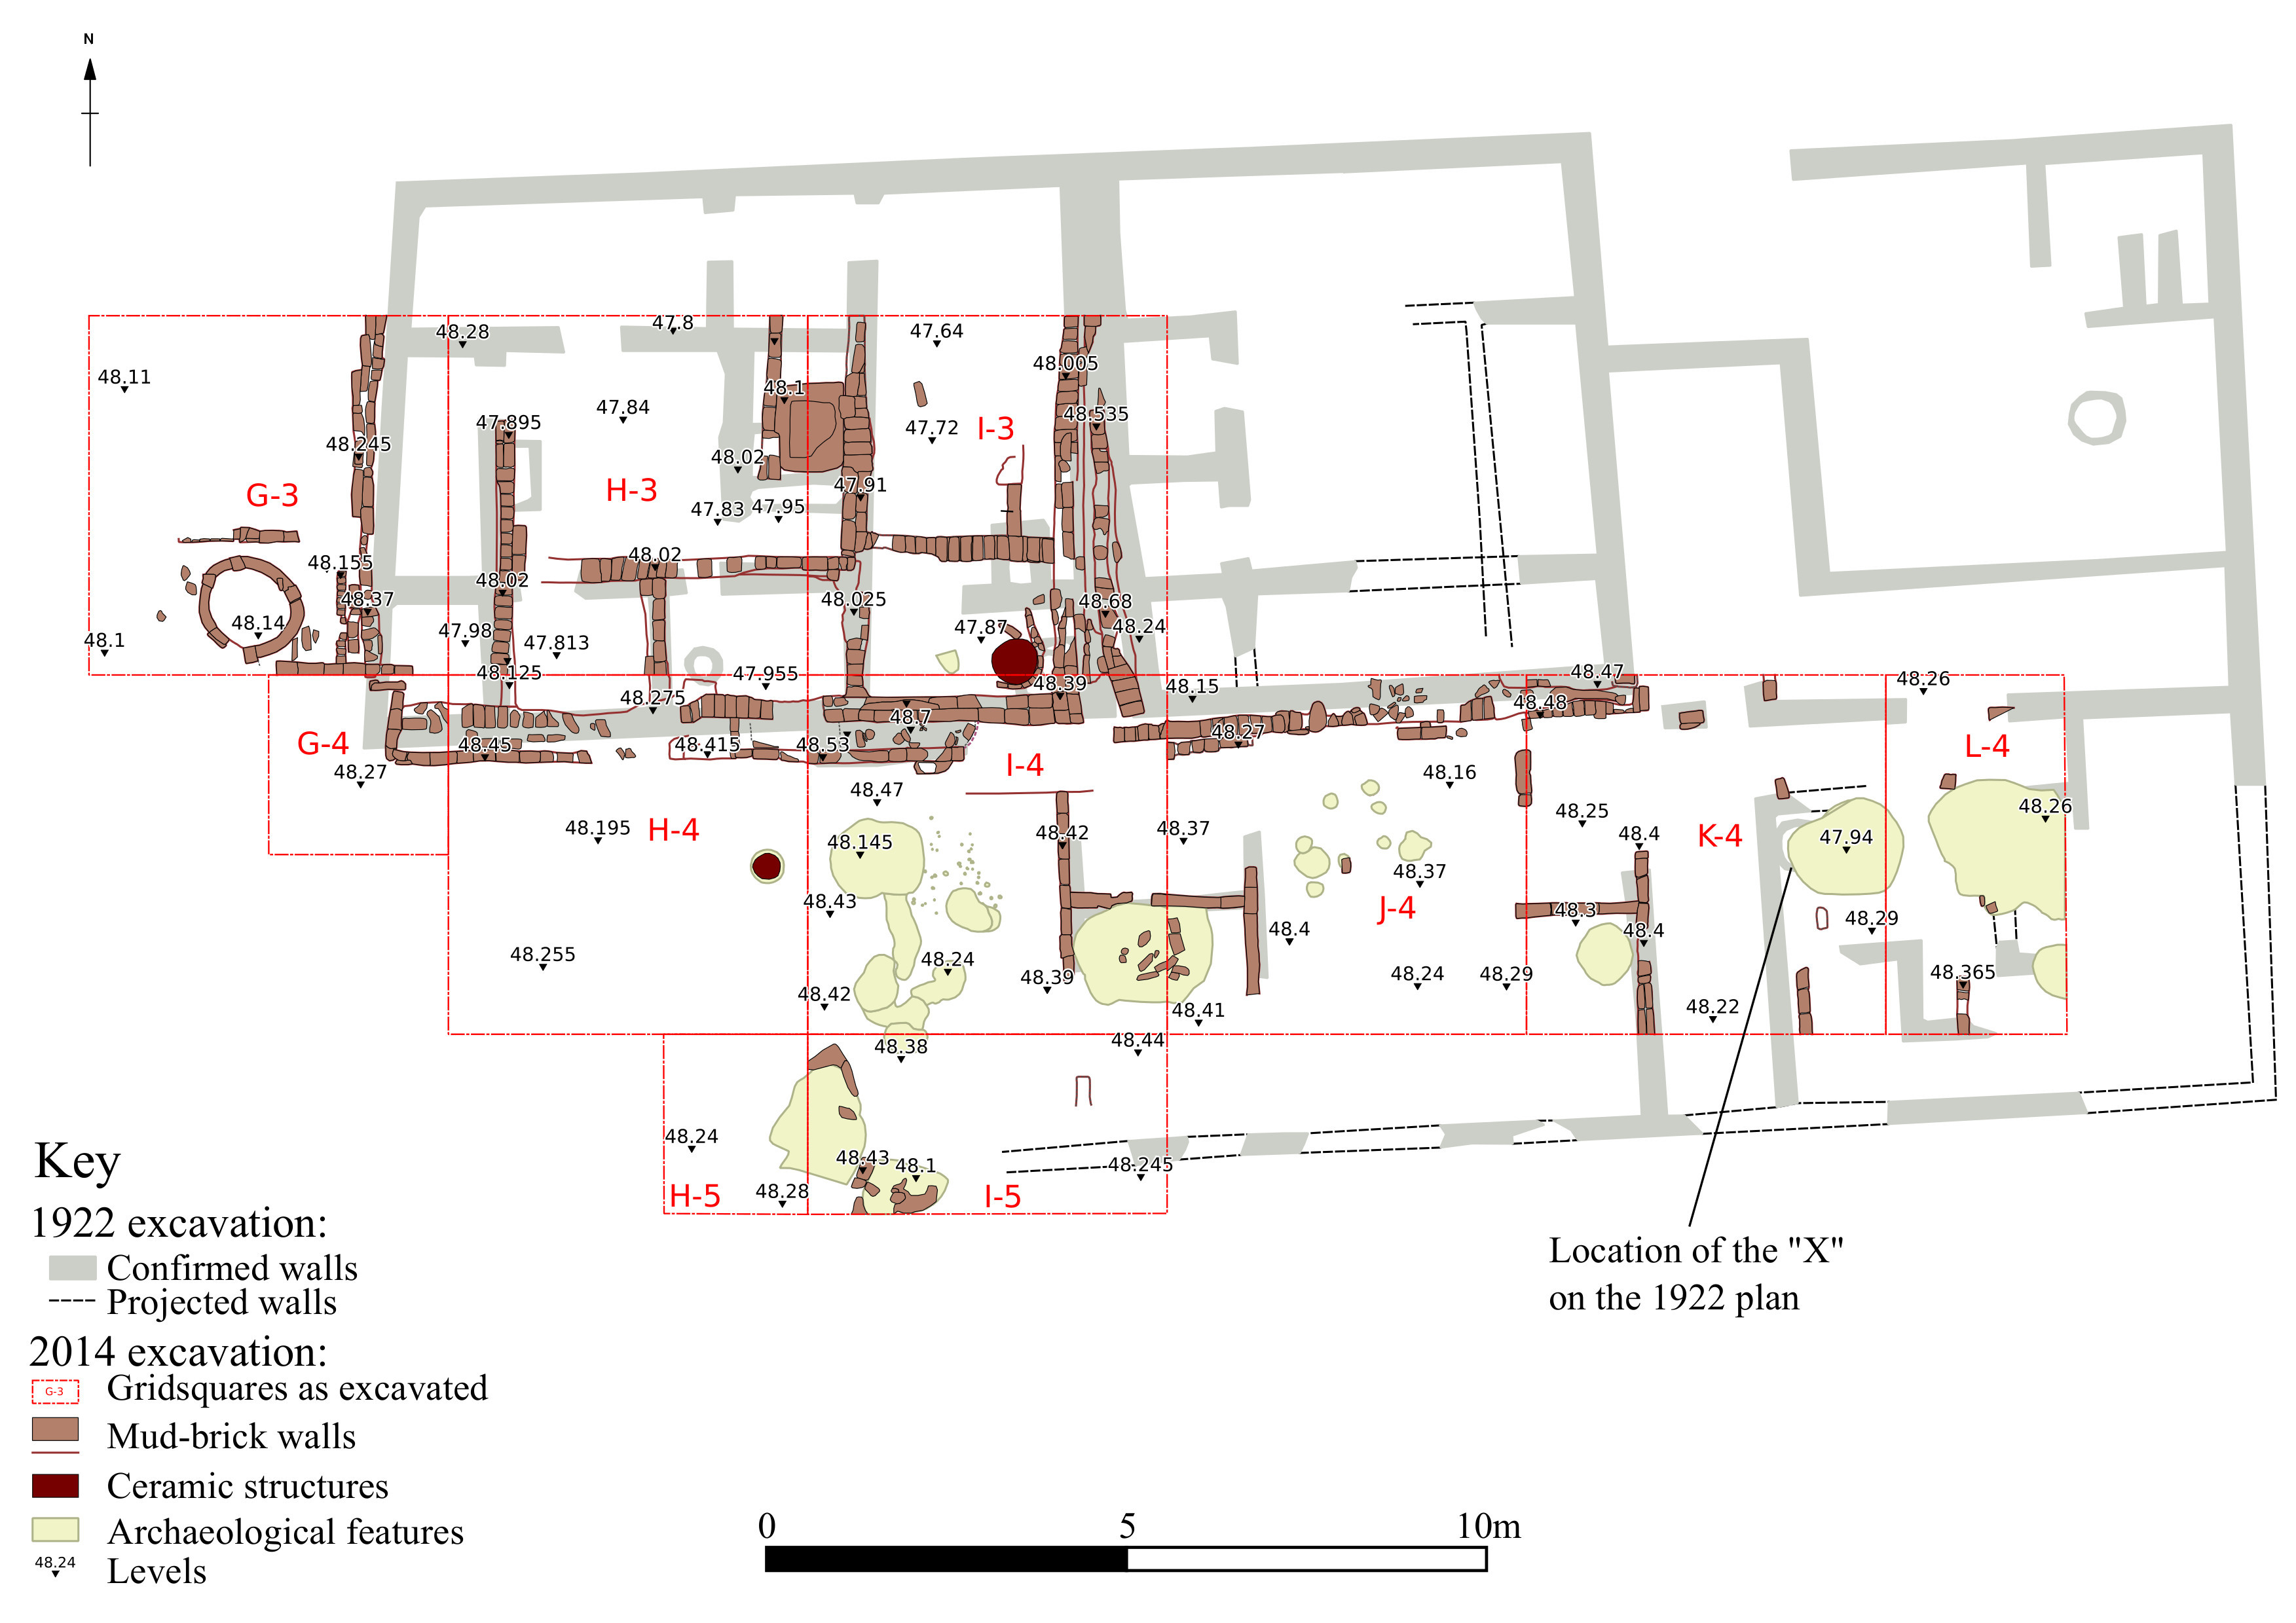 Plan of the site as excavated